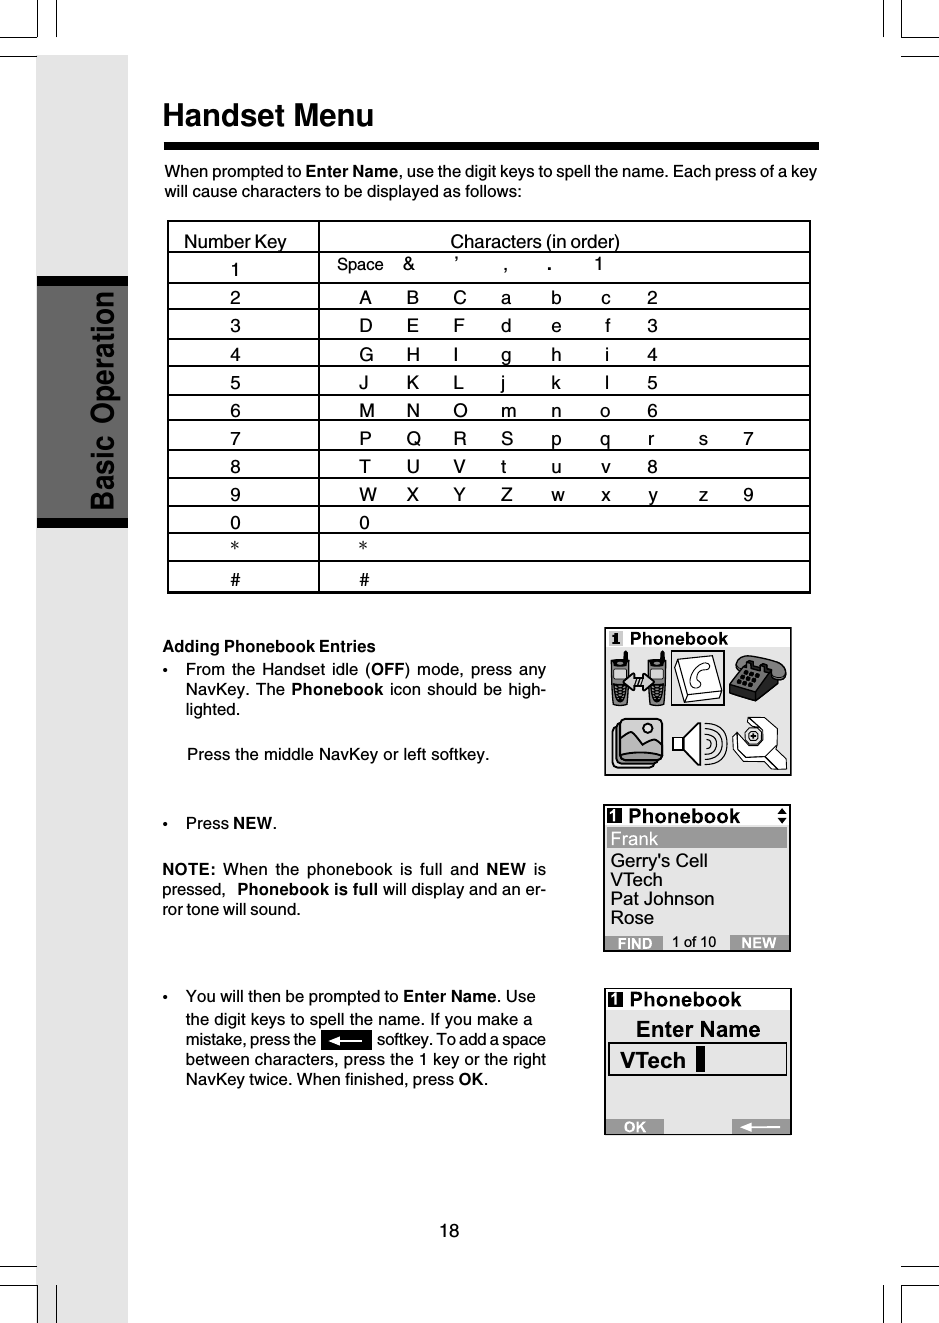 18Basic Operation1 of 10Gerry&apos;s CellVTechPat JohnsonRoseVTechAdding Phonebook Entries•From the Handset idle (OFF) mode, press anyNavKey. The Phonebook icon should be high-lighted.     Press the middle NavKey or left softkey.•Press NEW.NOTE: When the phonebook is full and NEW ispressed, Phonebook is full will display and an er-ror tone will sound.•You will then be prompted to Enter Name. Usethe digit keys to spell the name. If you make amistake, press the   softkey. To add a spacebetween characters, press the 1 key or the rightNavKey twice. When finished, press OK.Handset MenuWhen prompted to Enter Name, use the digit keys to spell the name. Each press of a keywill cause characters to be displayed as follows:Number Key Characters (in order)12ABCab c 23DEFde  f 34GHIgh  i 45JKLjk  l 56MNOmn o 67PQRSp q r s78TUVtu v 89WXYZw x y z900**##Space    &amp;        ’         ,    .    1